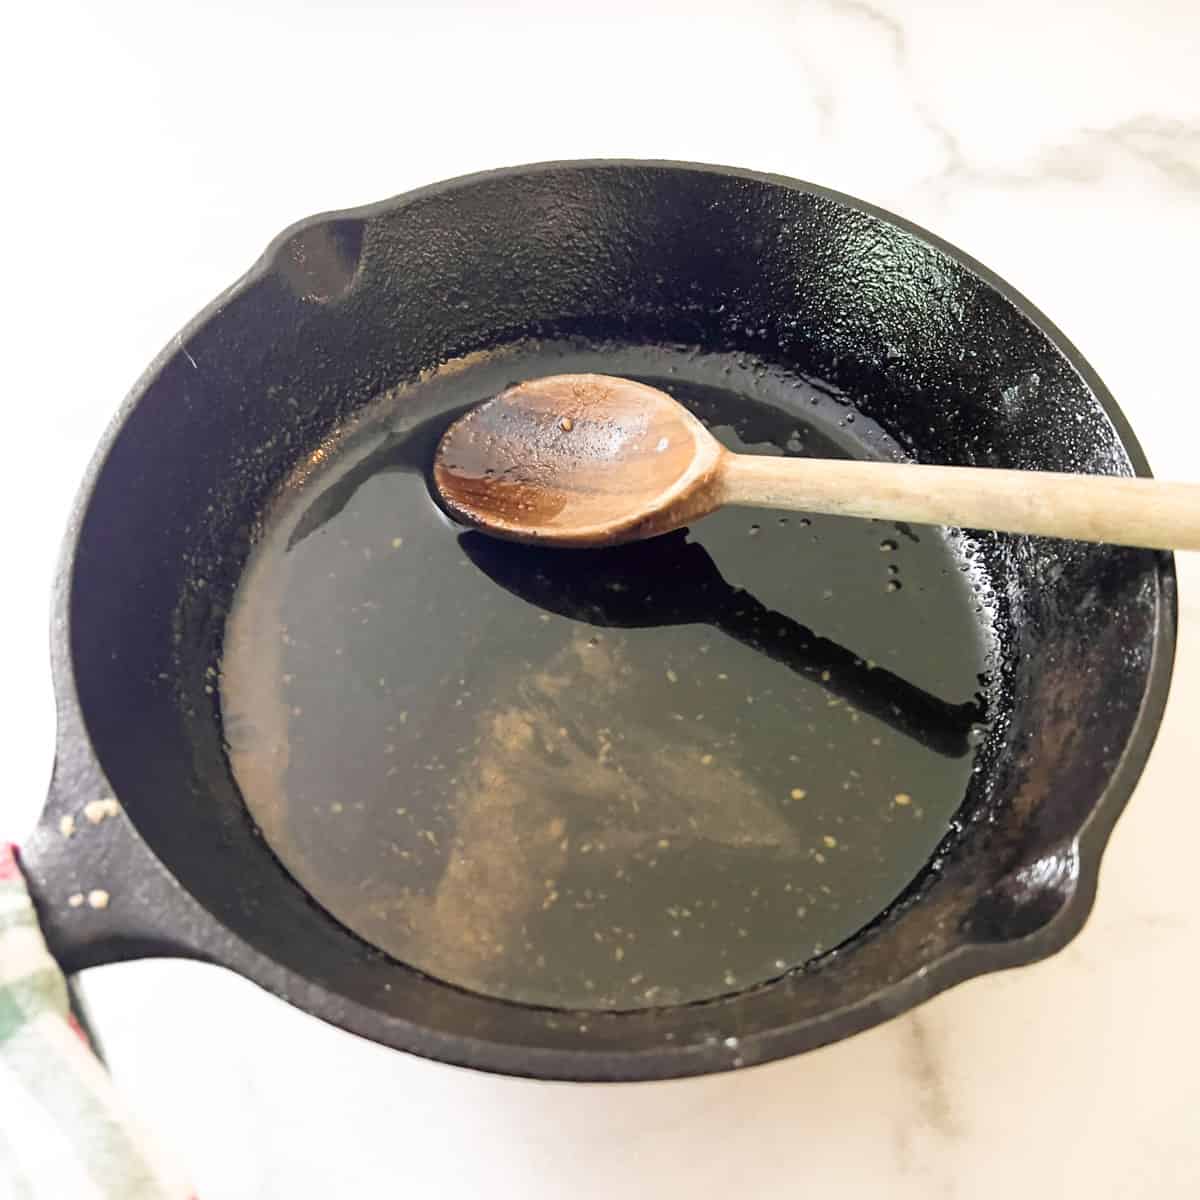 Water, brown sugar and mustard mixed and cooking in small cast iron skillet.